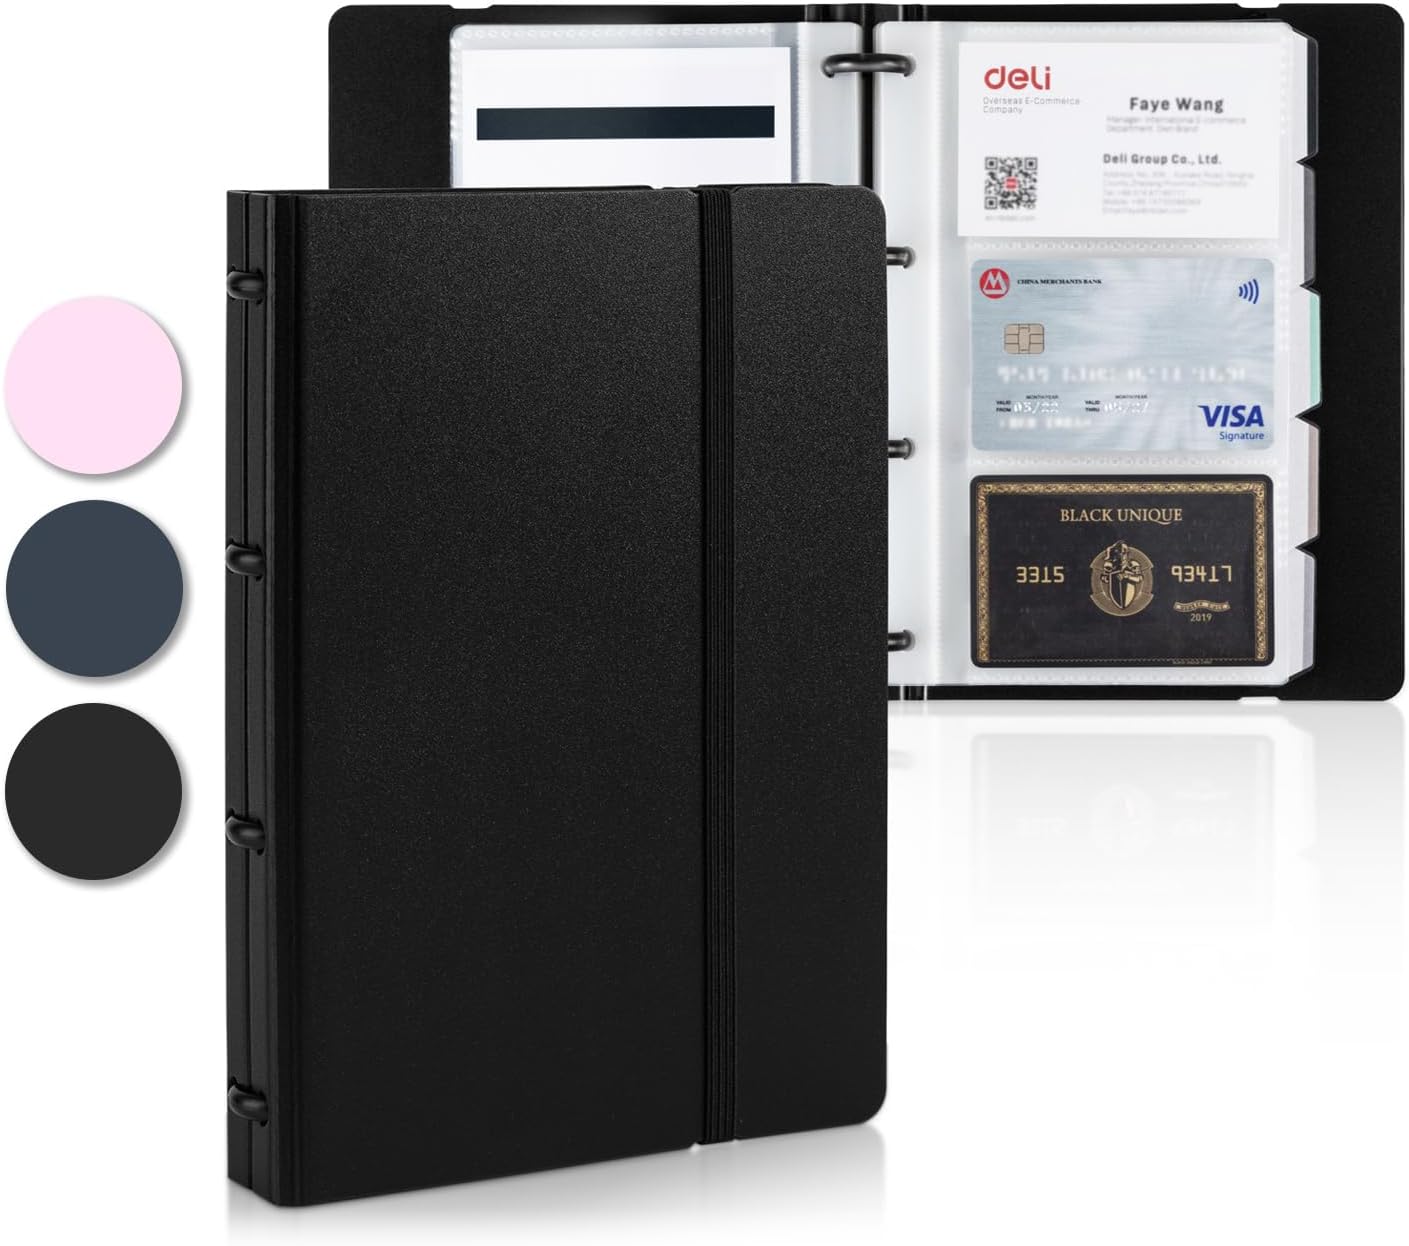 deli Business Card Book Holder, Business Card Organizer, Name Card, Portable Office, Hold 180 Cards, Black